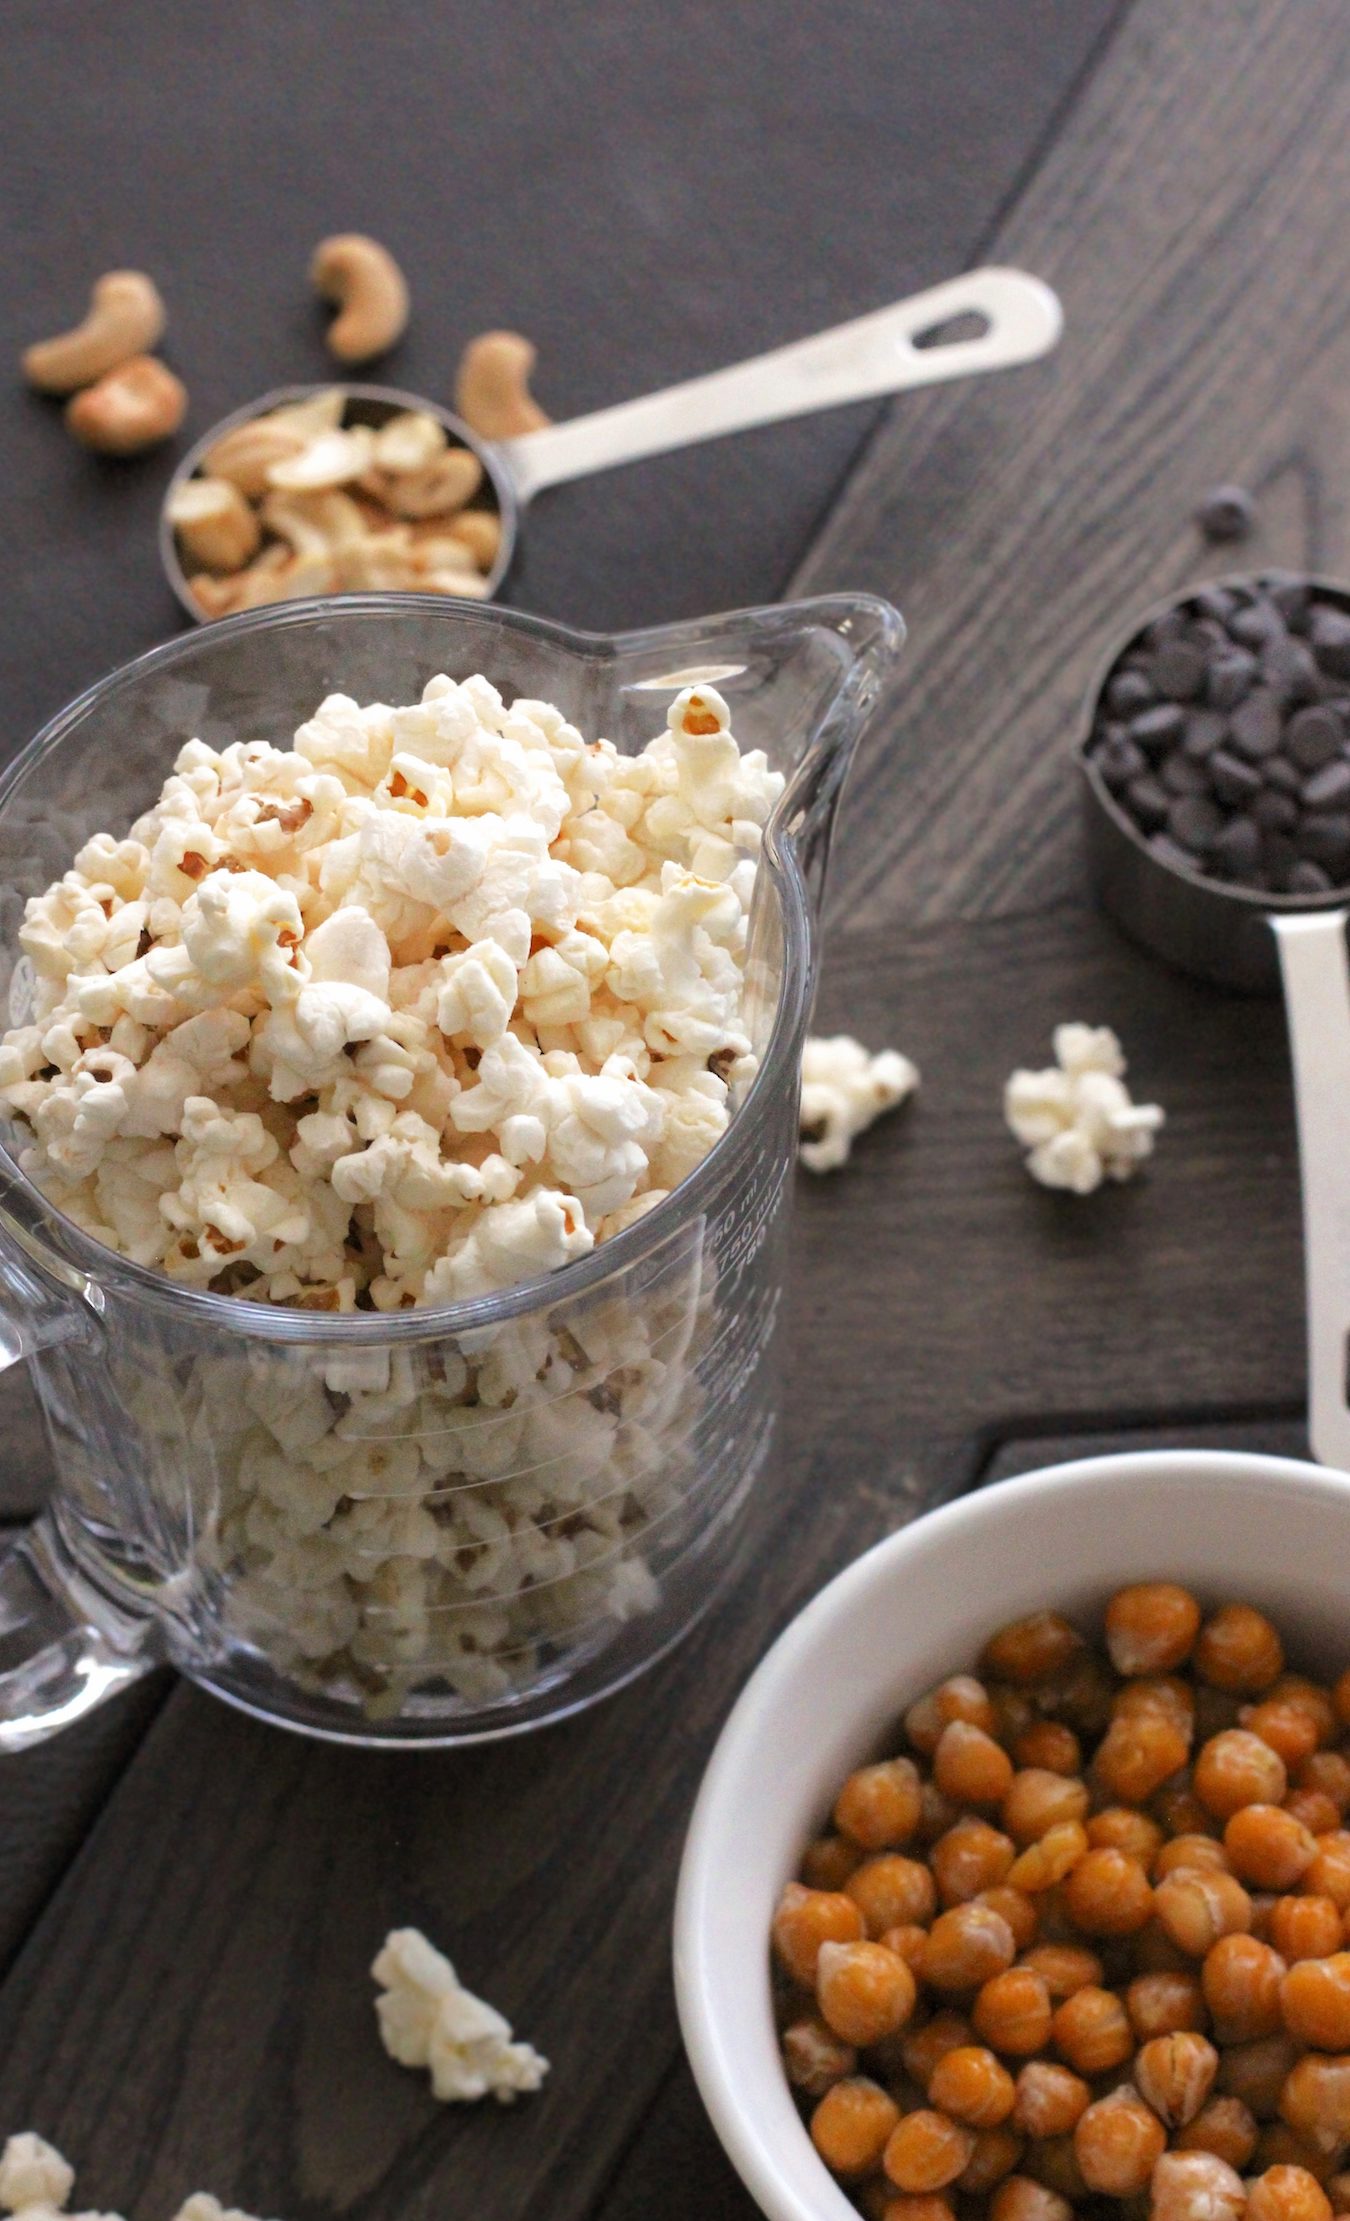 Healthy Chocolate Cashew Popcorn – the Perfect Snack for Game Day! (sugar free, low fat, high protein, high fiber, gluten free, dairy free, vegan) - Healthy Dessert Recipes at Desserts with Benefits